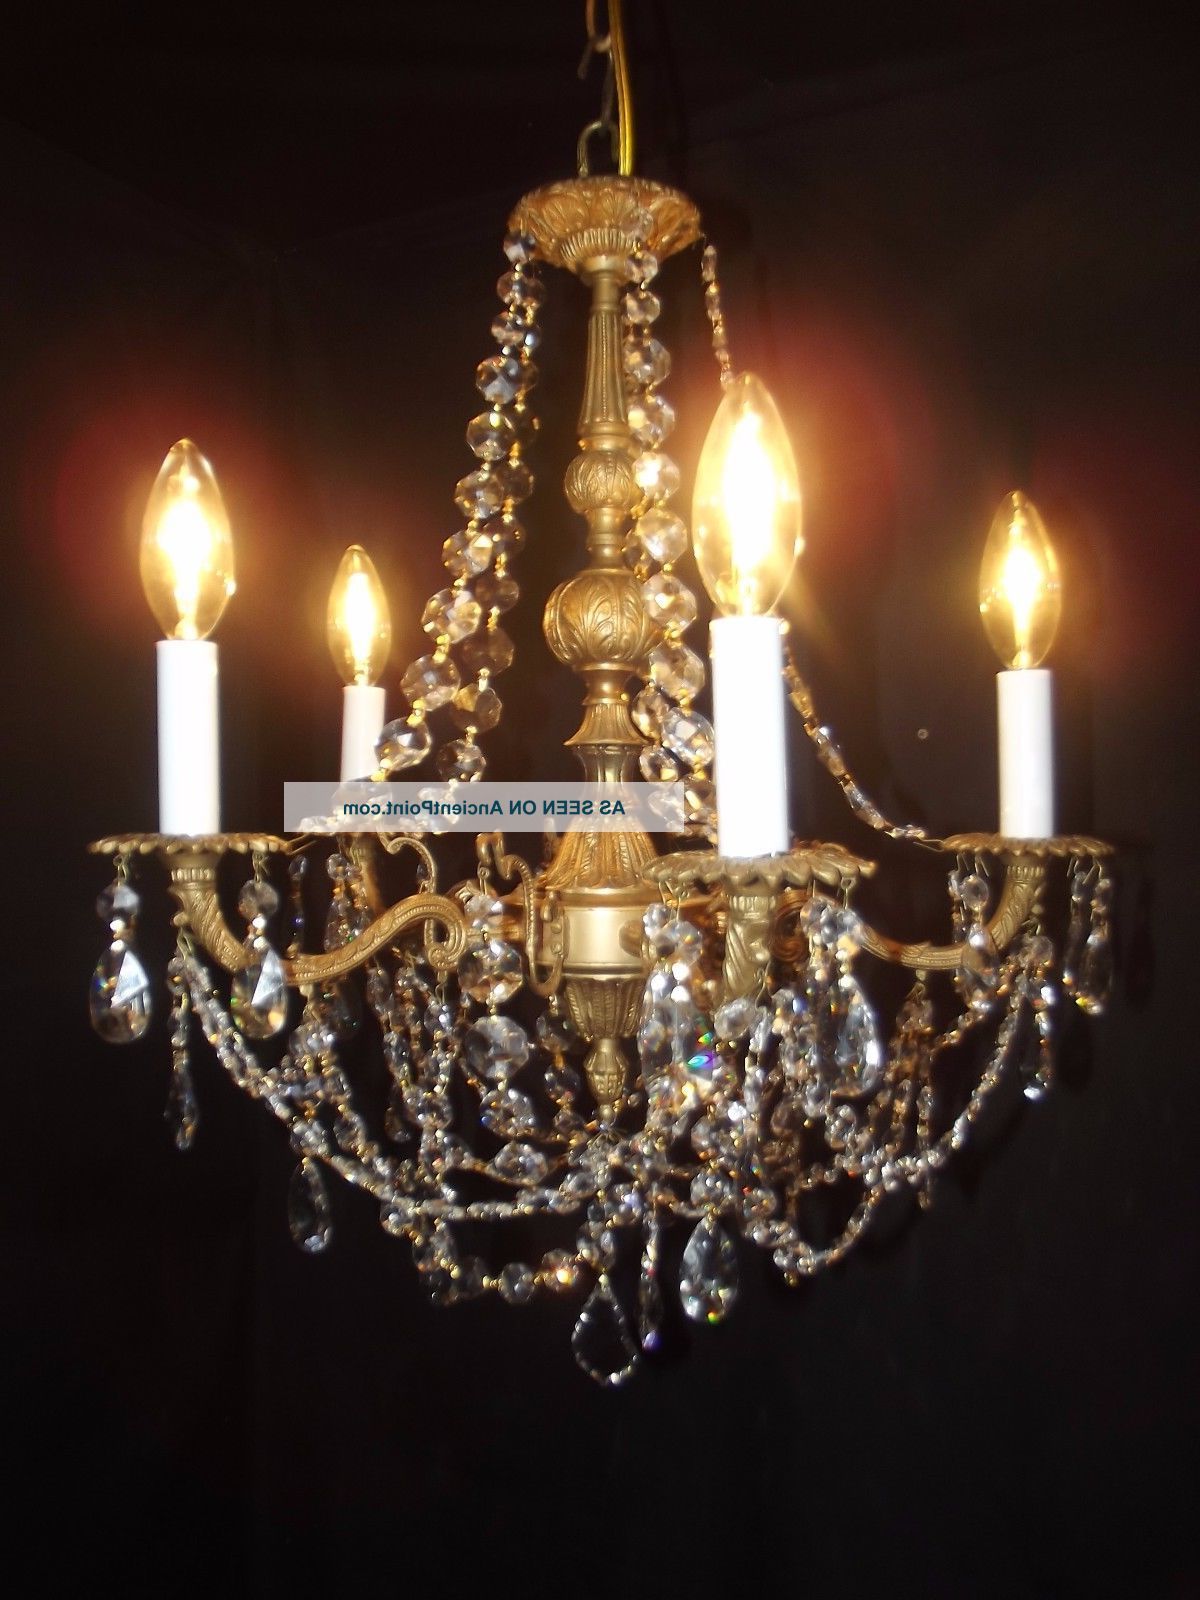 Antique Brass Crystal Chandelier 5 Lights Quality 30 Lead Within Most Current Antique Brass Crystal Chandeliers (View 1 of 20)